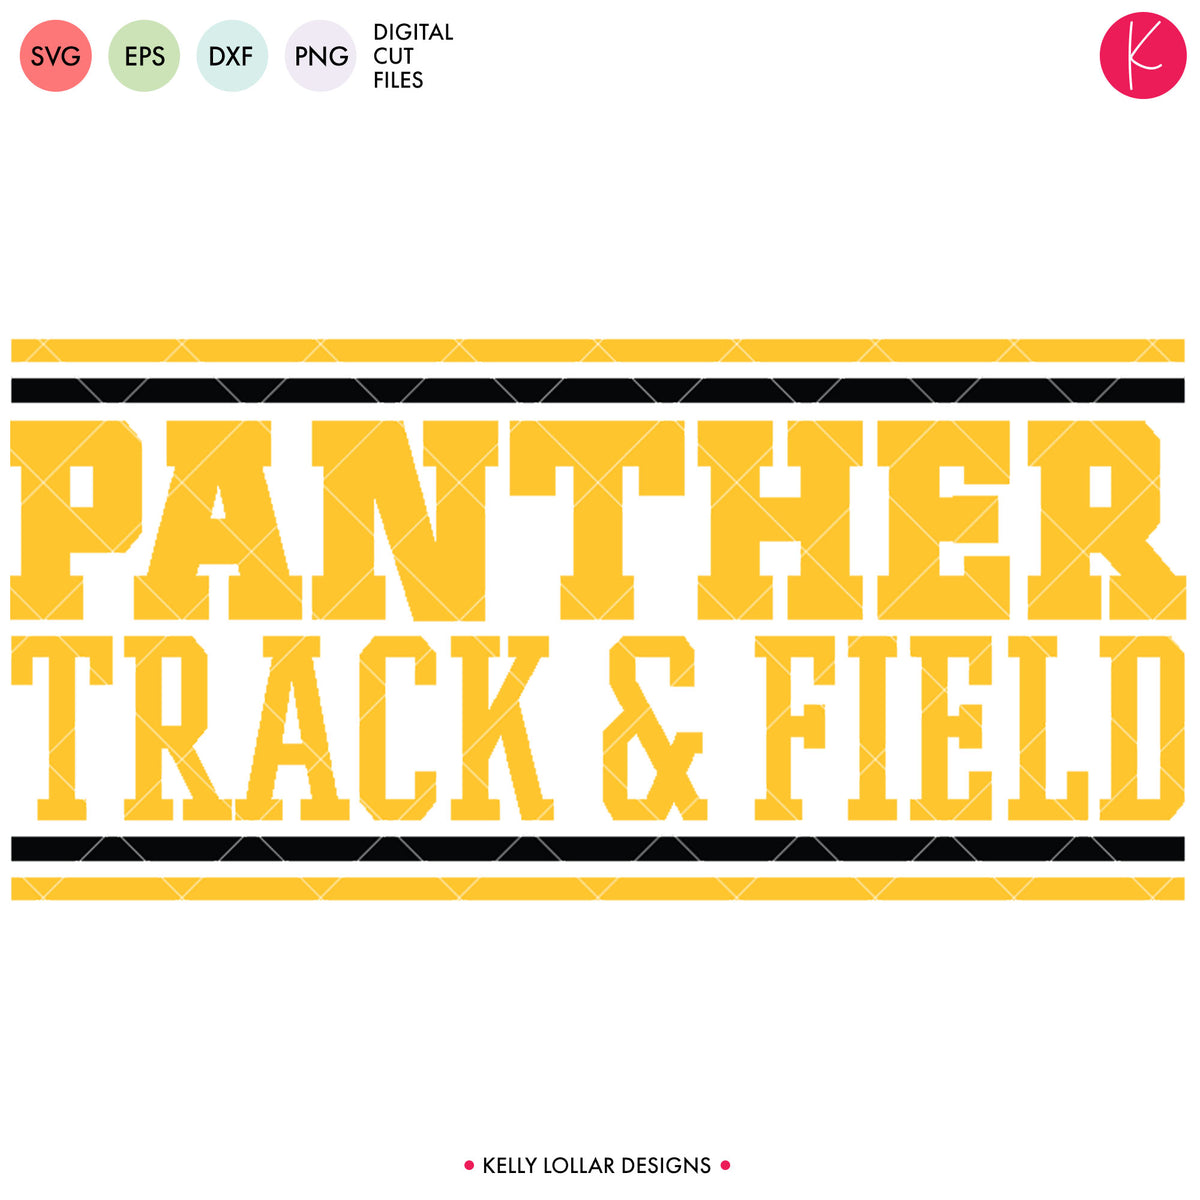 Panthers Track &amp; Field Bundle | SVG DXF EPS PNG Cut Files